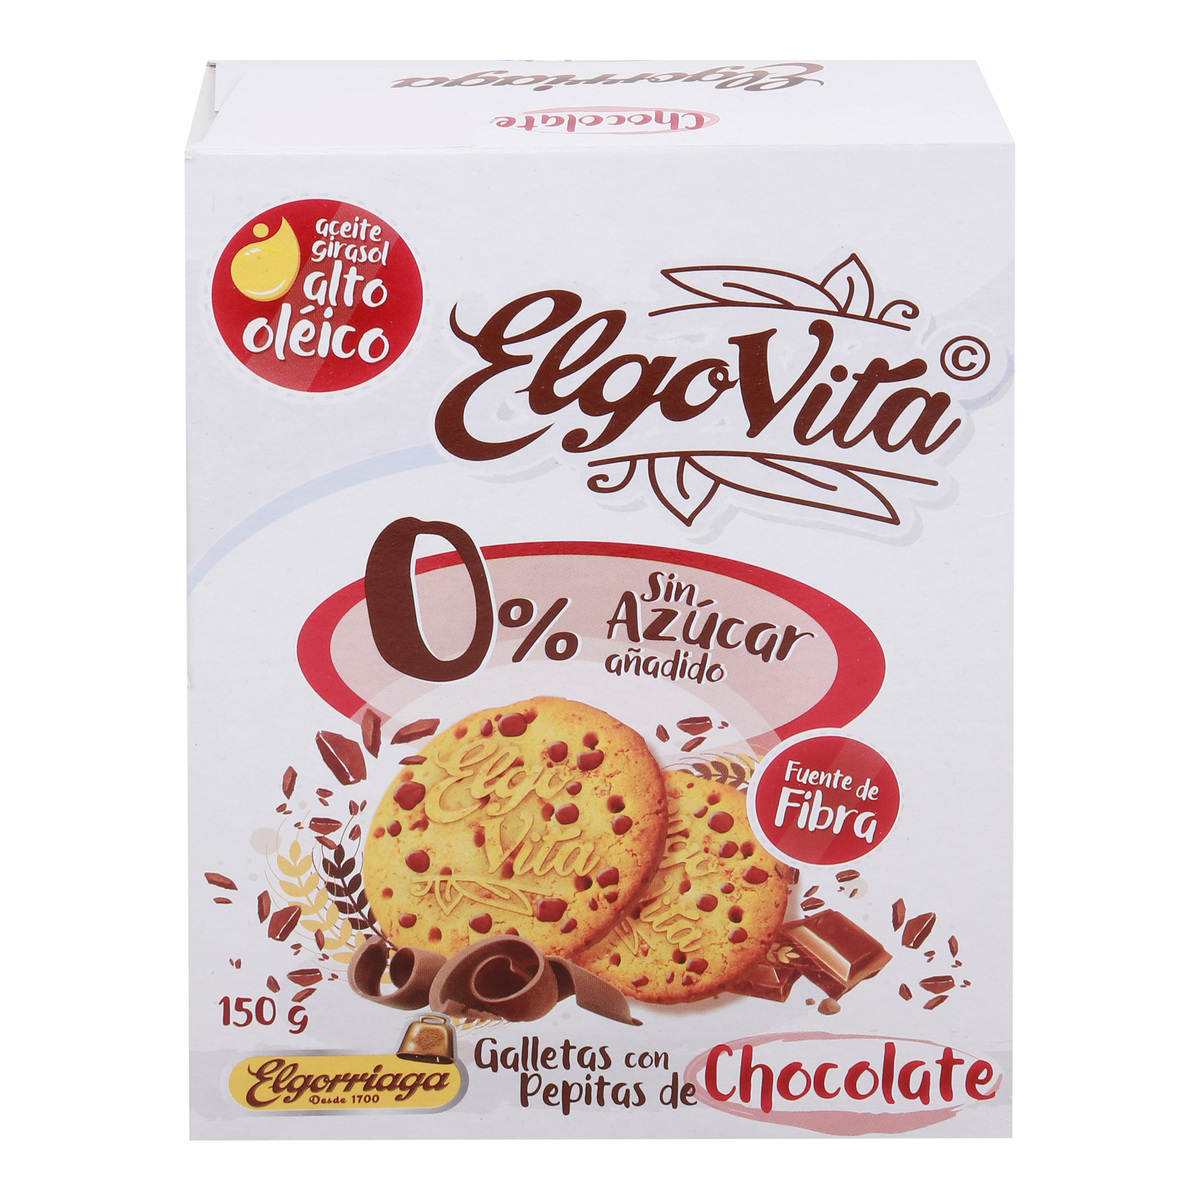 Elgovita 0% Sugar Added Biscuit with Chocolate Chips 150 g